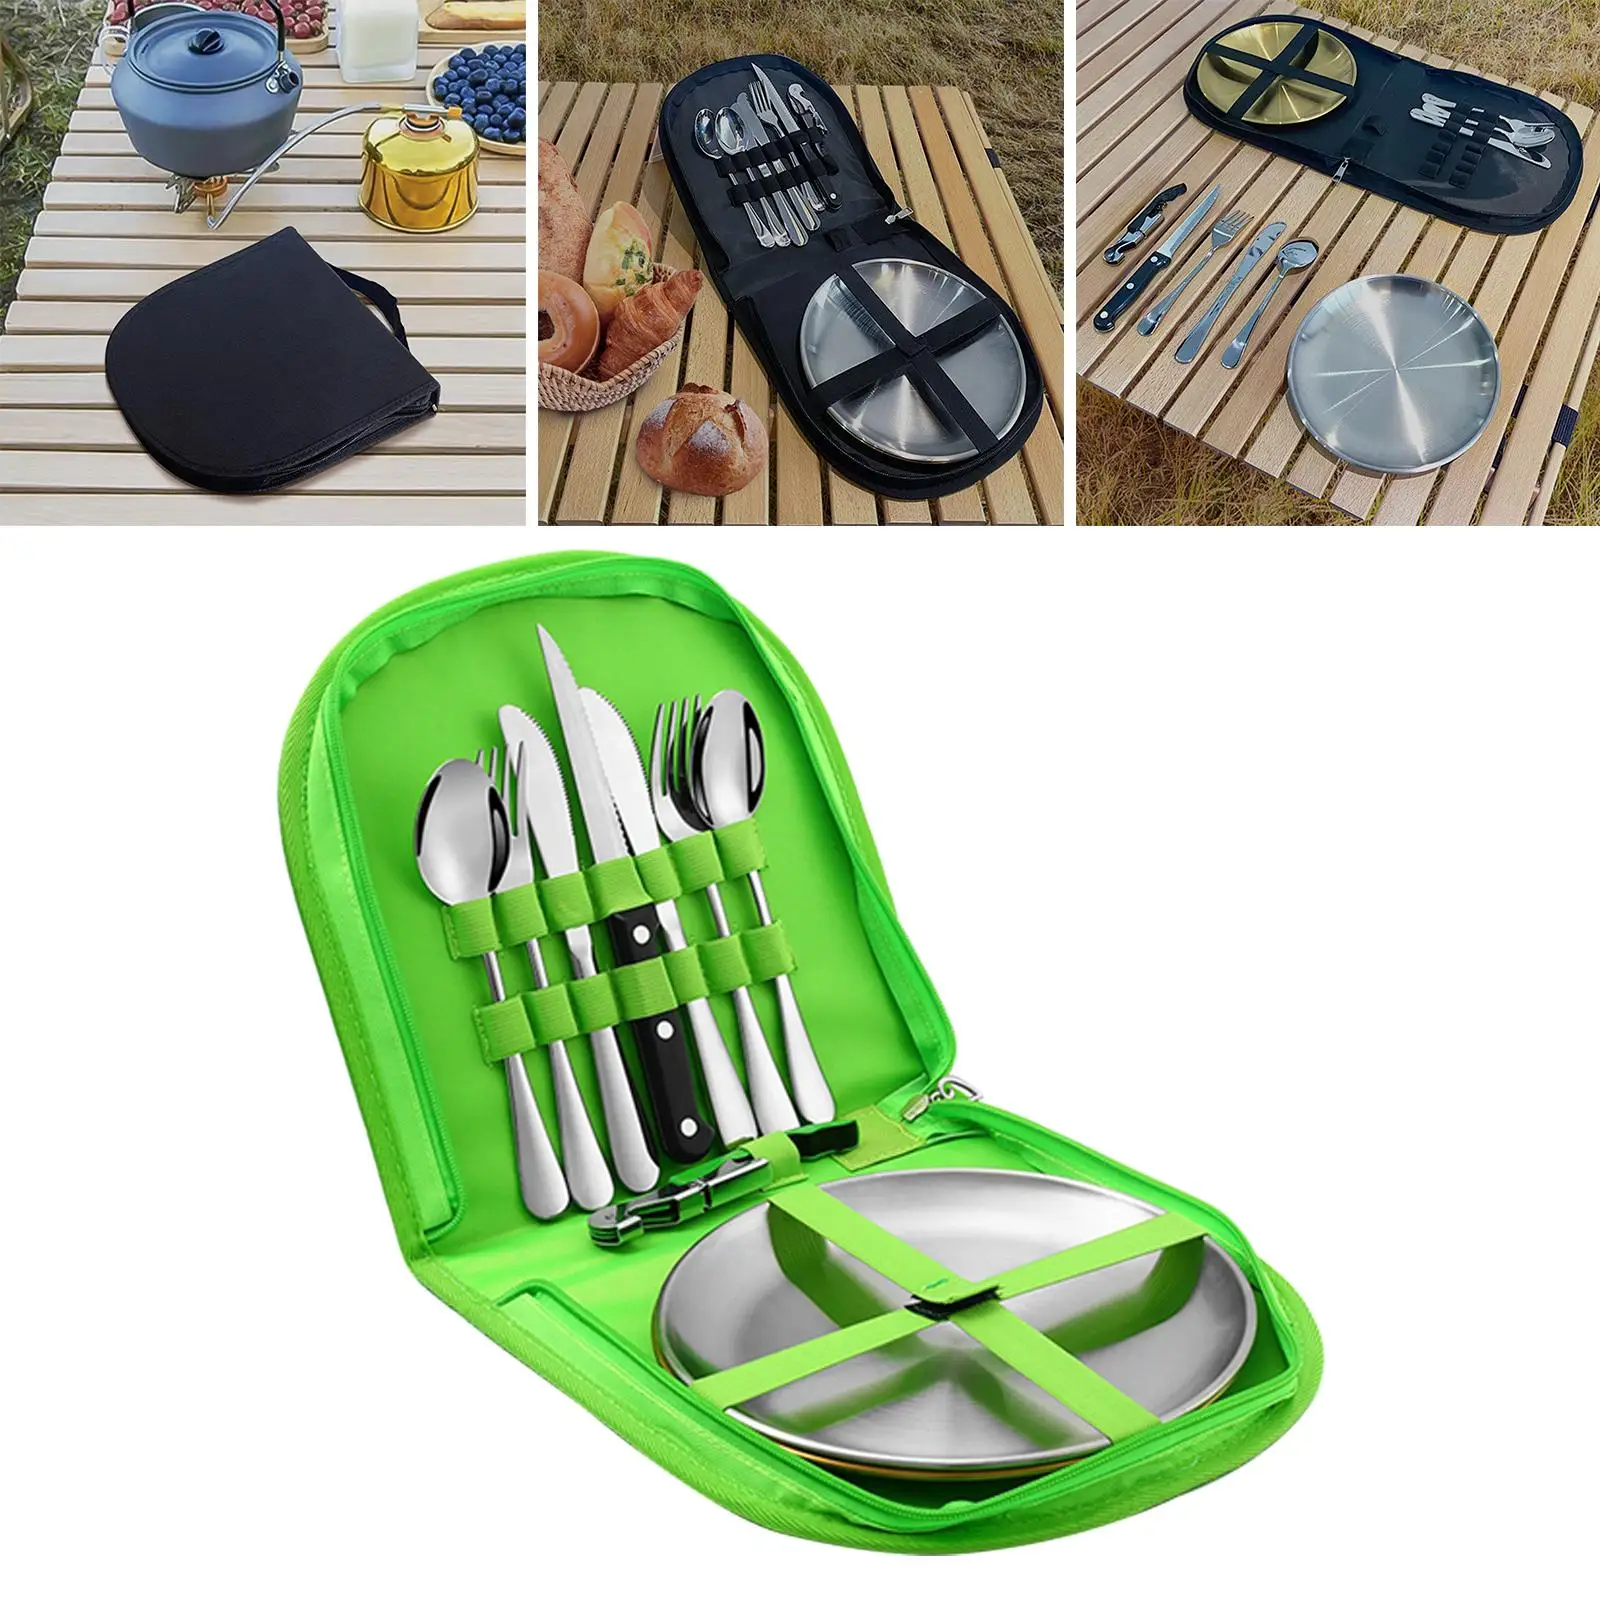 10 Pieces Compact Picnic Family Cutlery Set Camp Cooking Set for Barbecue